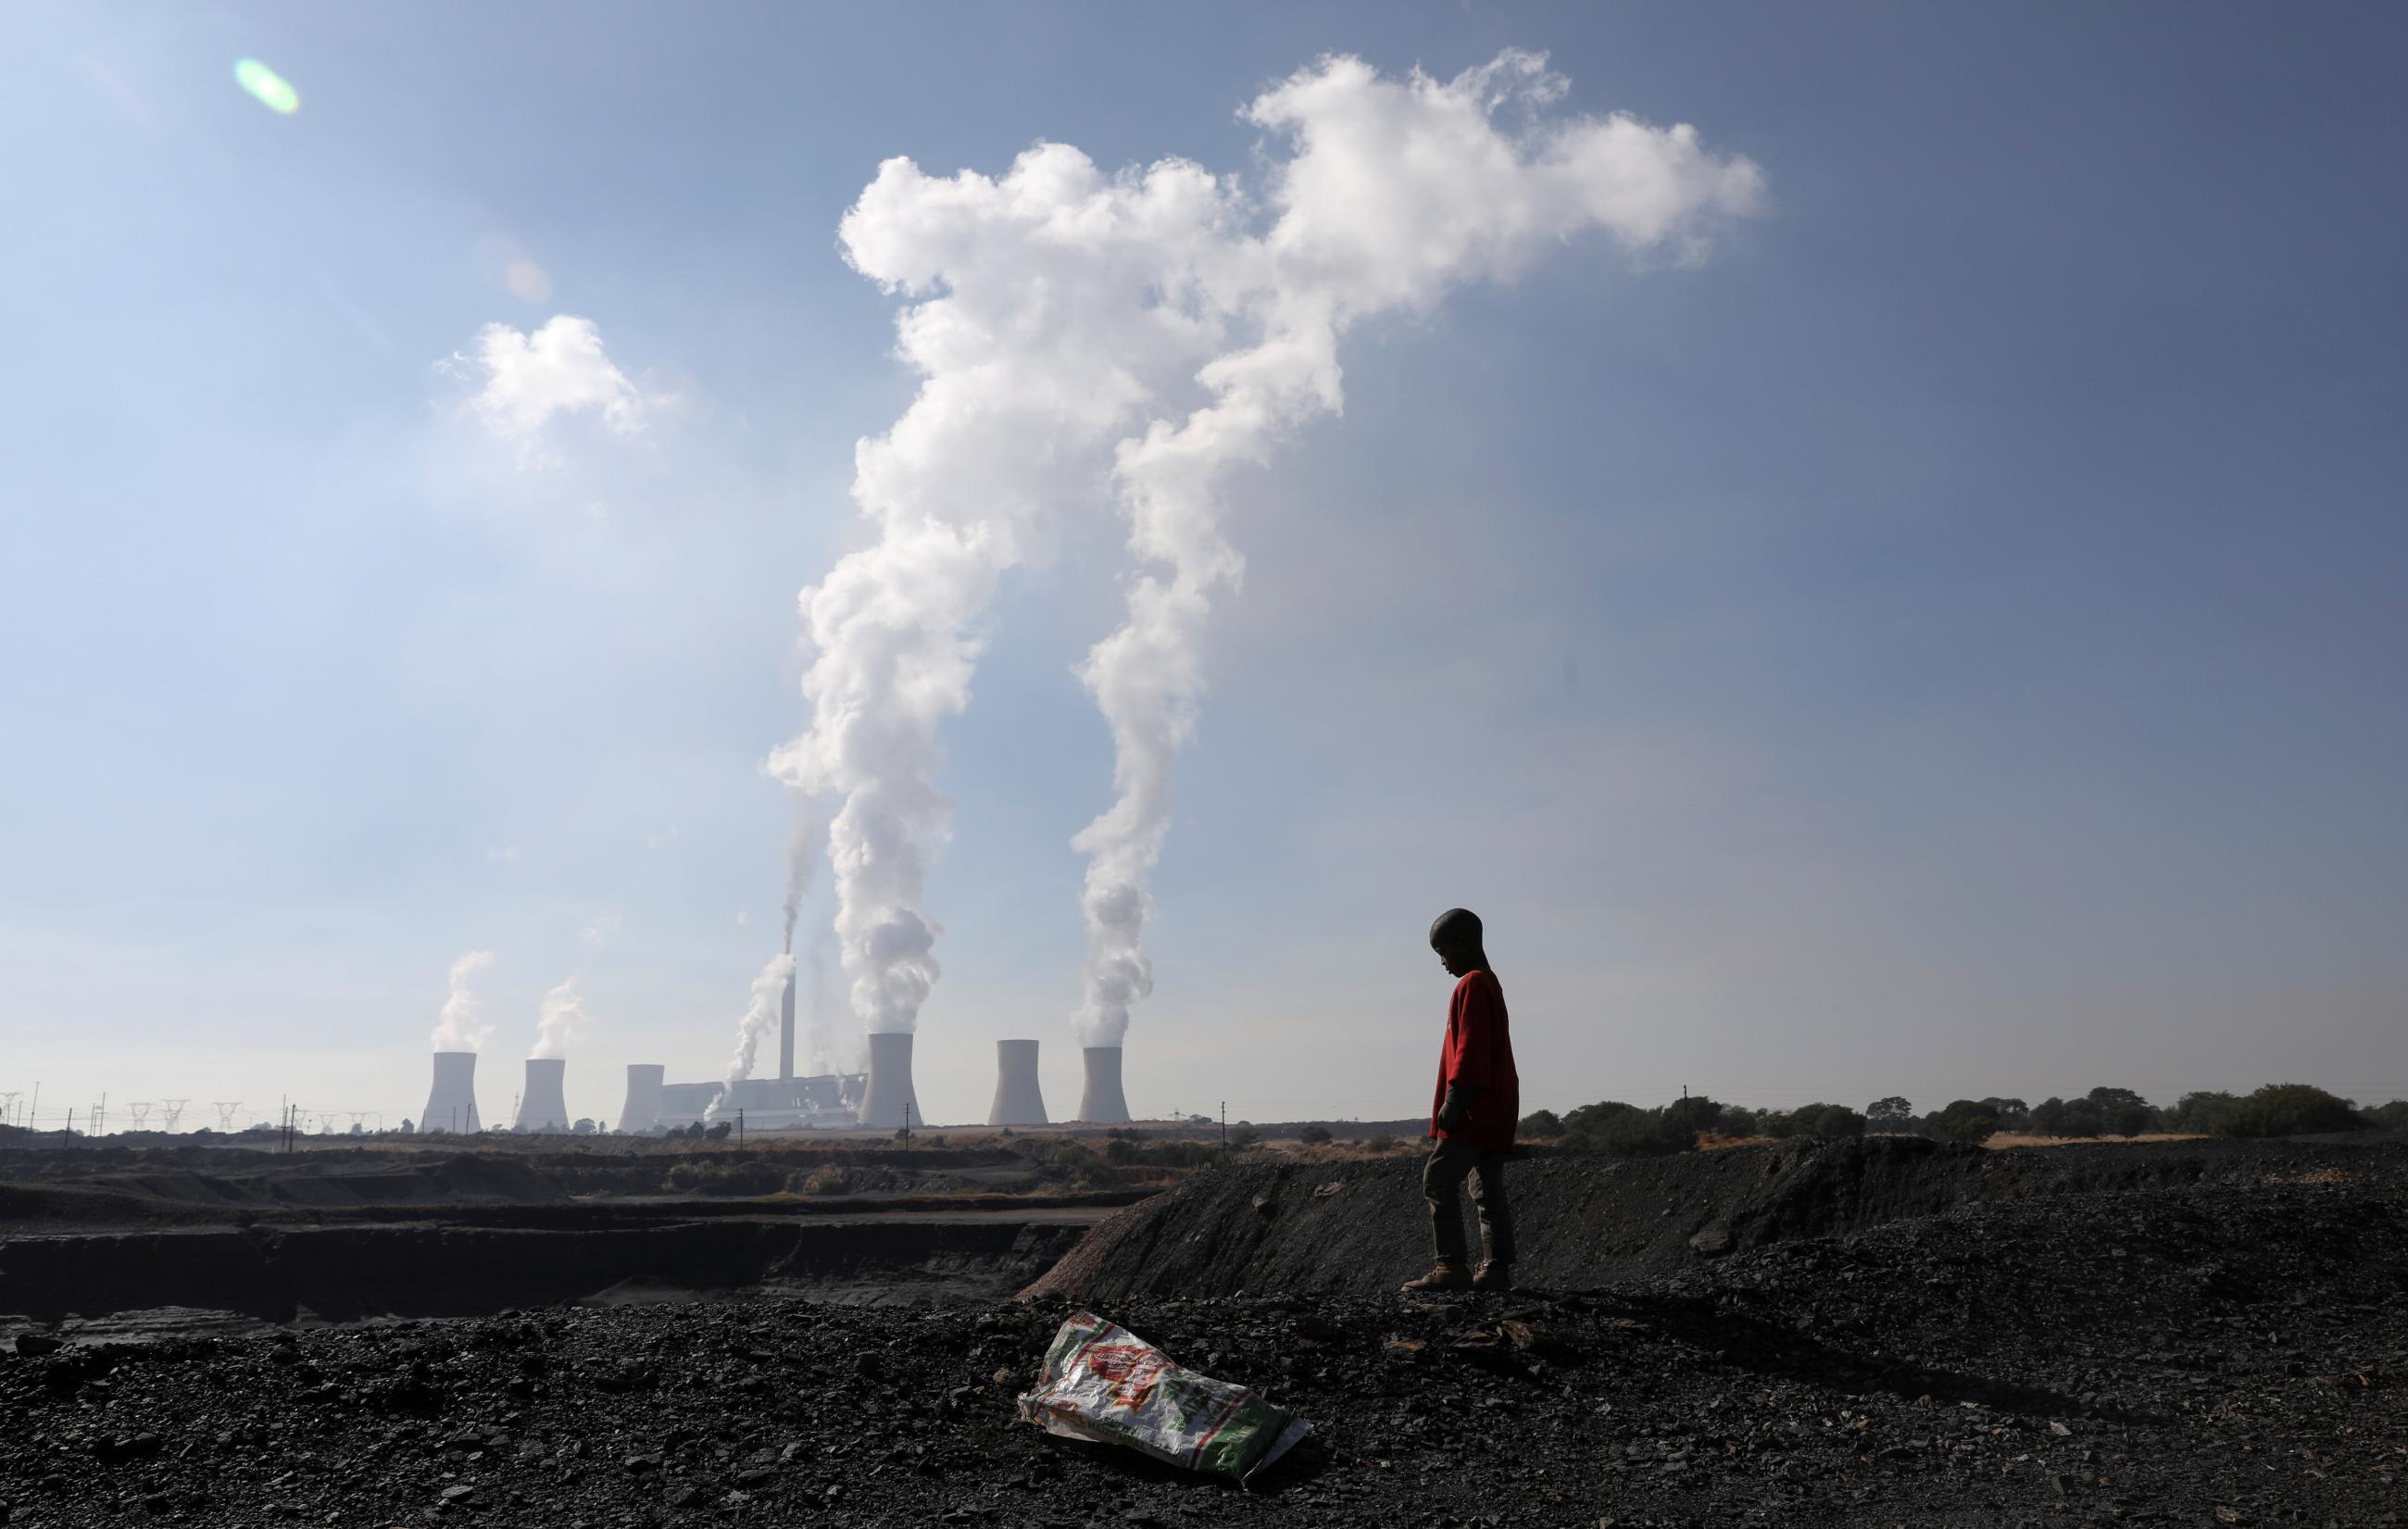 A child collecting chunks of coal looks on at a colliery while smoke rises from the Duvha coal-based power station.